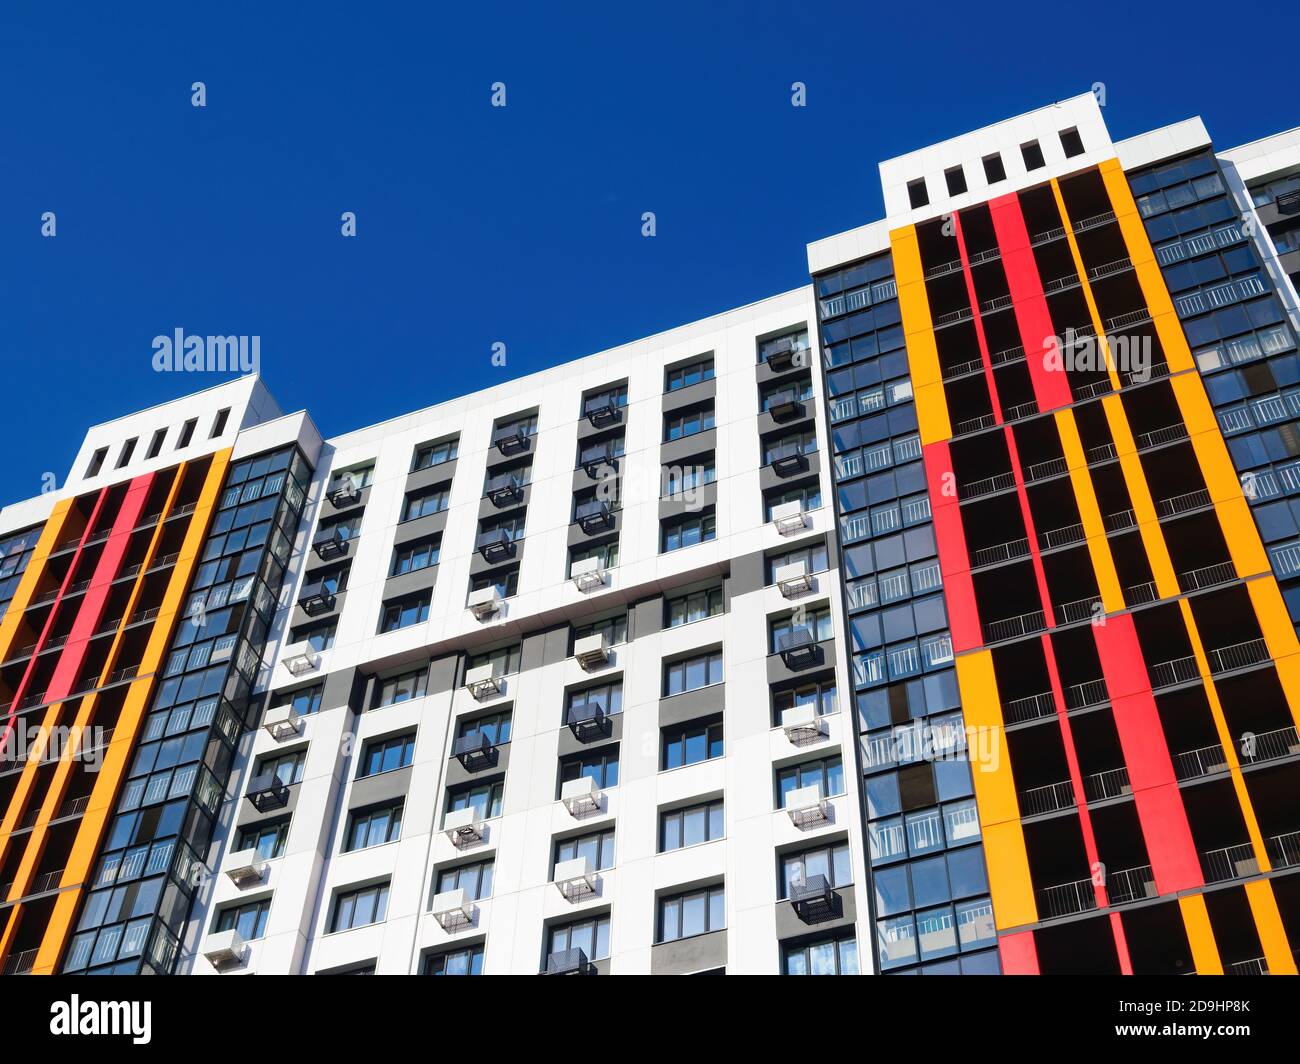 Modern building facade with windows, balconies and boxes for air conditioner on blue sky background. Stock Photo